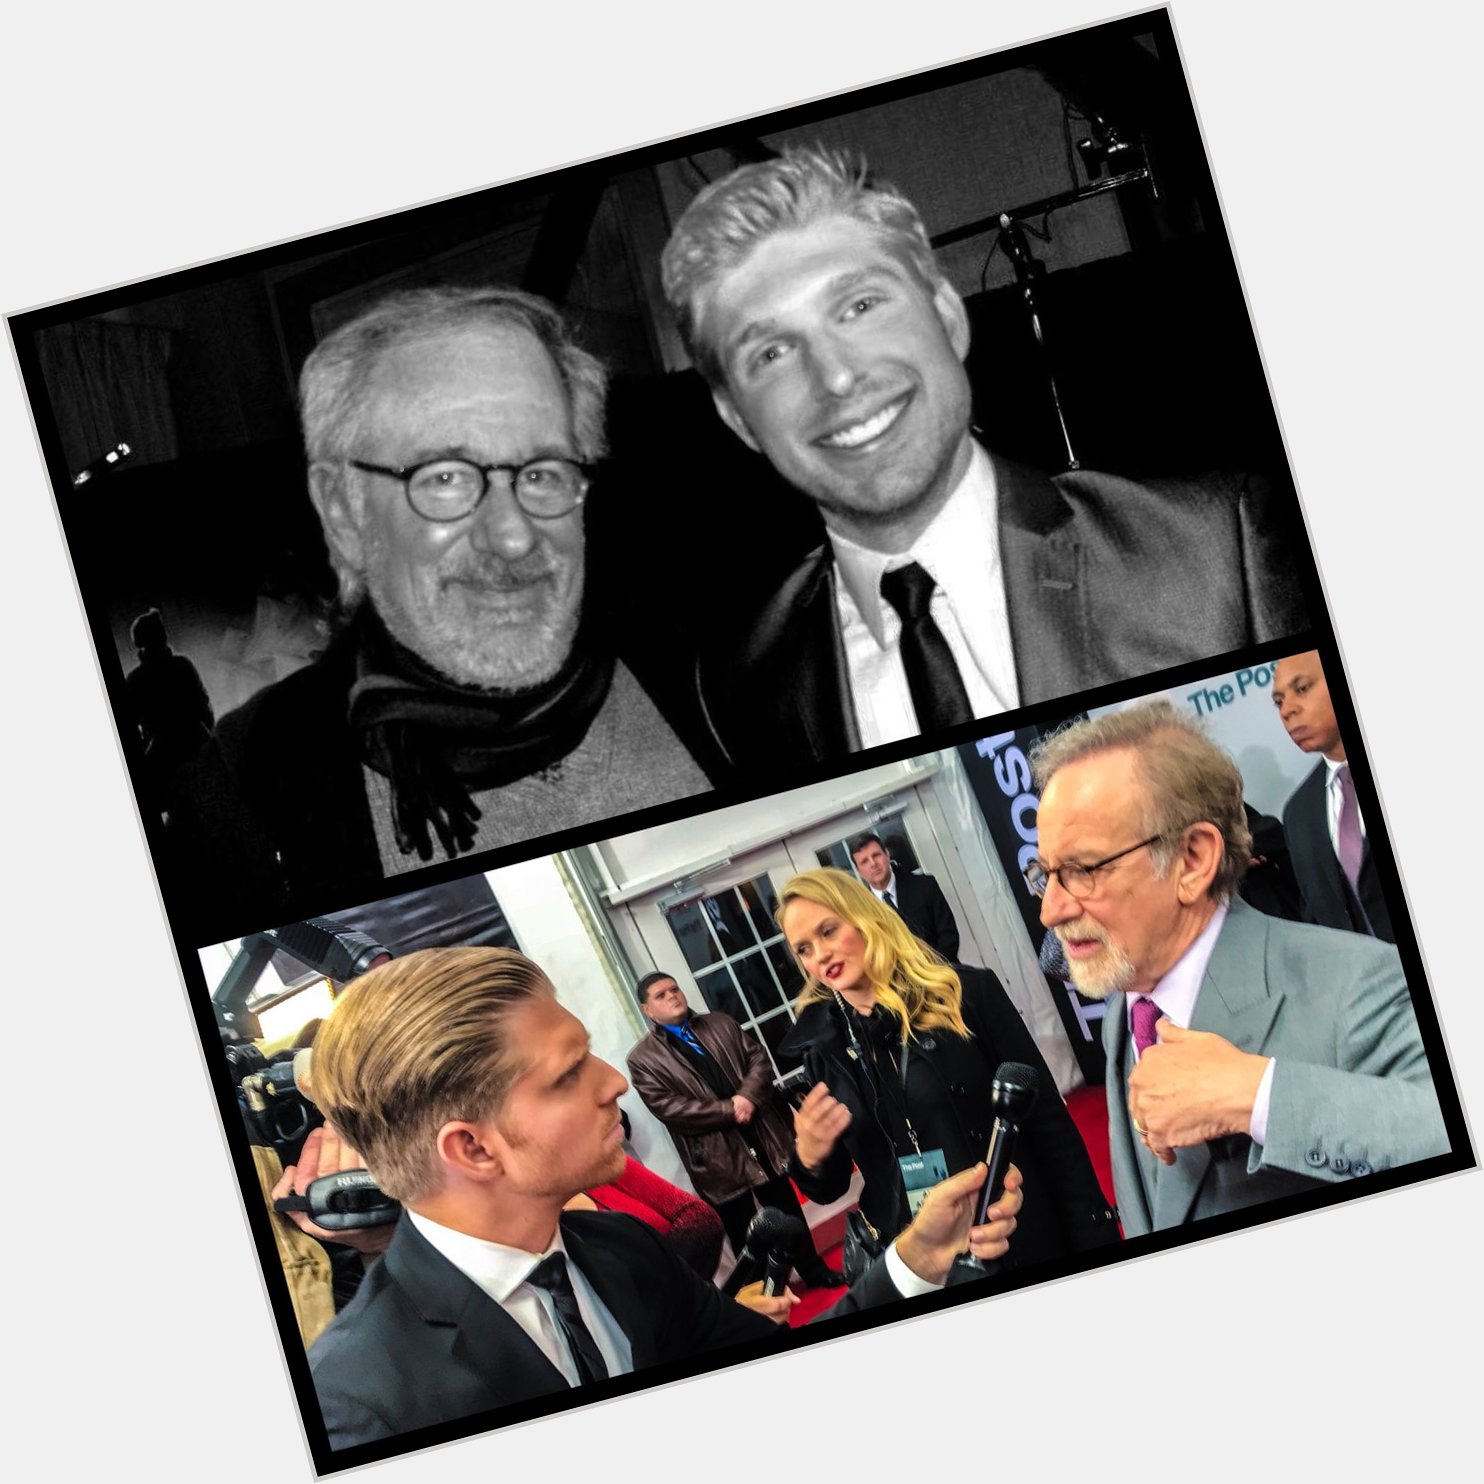 Happy Birthday to my favorite director of all time STEVEN SPIELBERG!

What s your favorite movie of his?! 